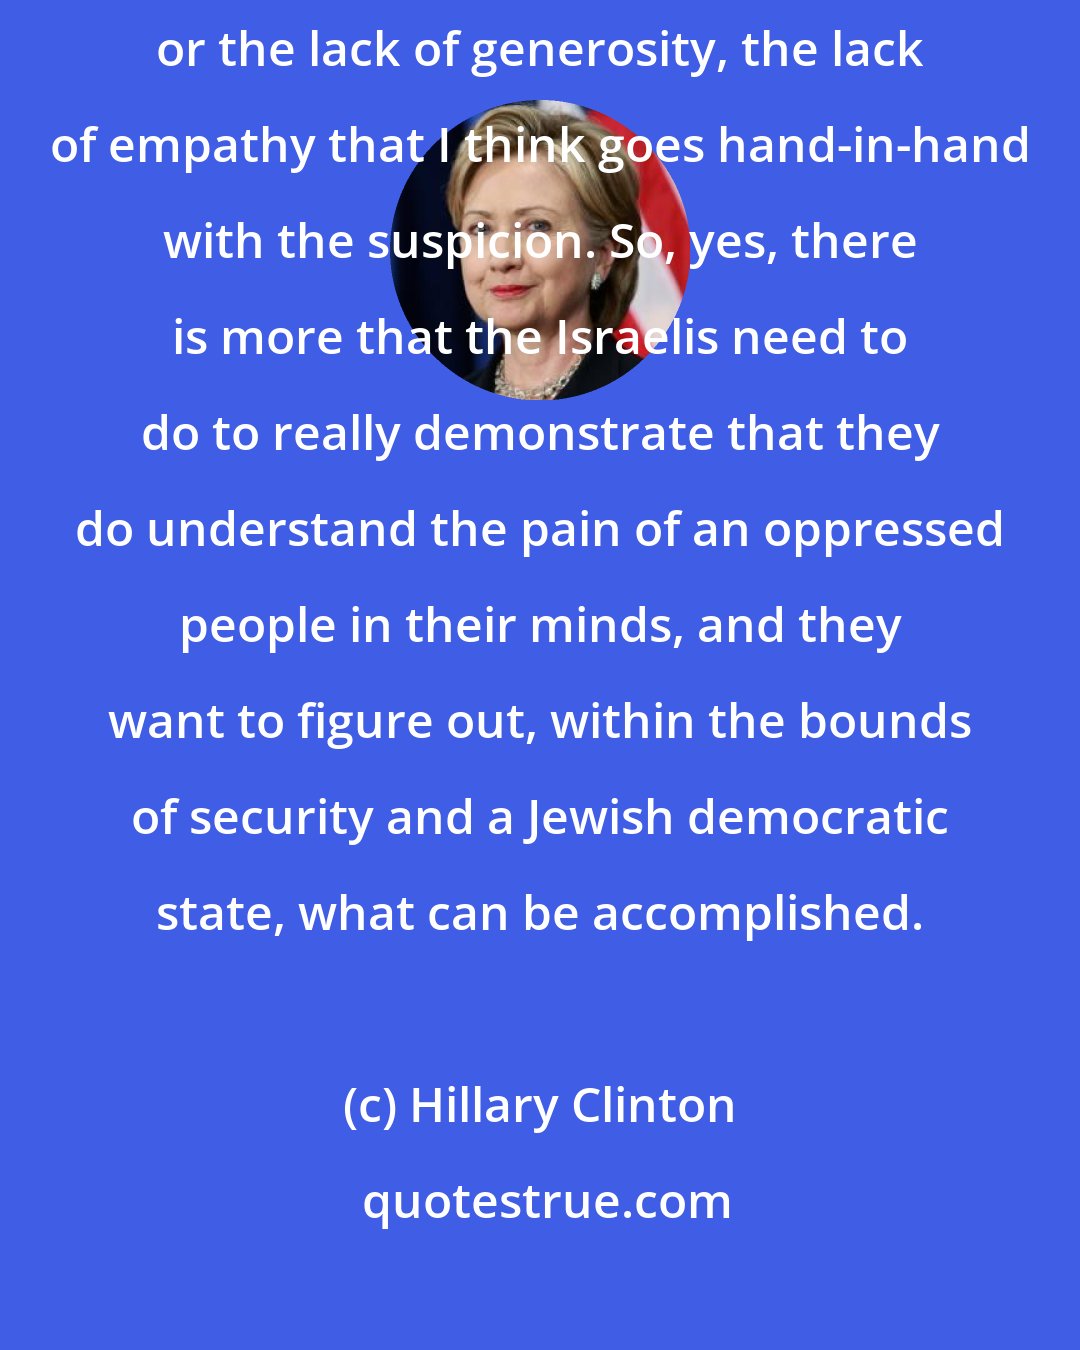 Hillary Clinton: I'm not making excuses for the missed opportunities of the Israelis, or the lack of generosity, the lack of empathy that I think goes hand-in-hand with the suspicion. So, yes, there is more that the Israelis need to do to really demonstrate that they do understand the pain of an oppressed people in their minds, and they want to figure out, within the bounds of security and a Jewish democratic state, what can be accomplished.